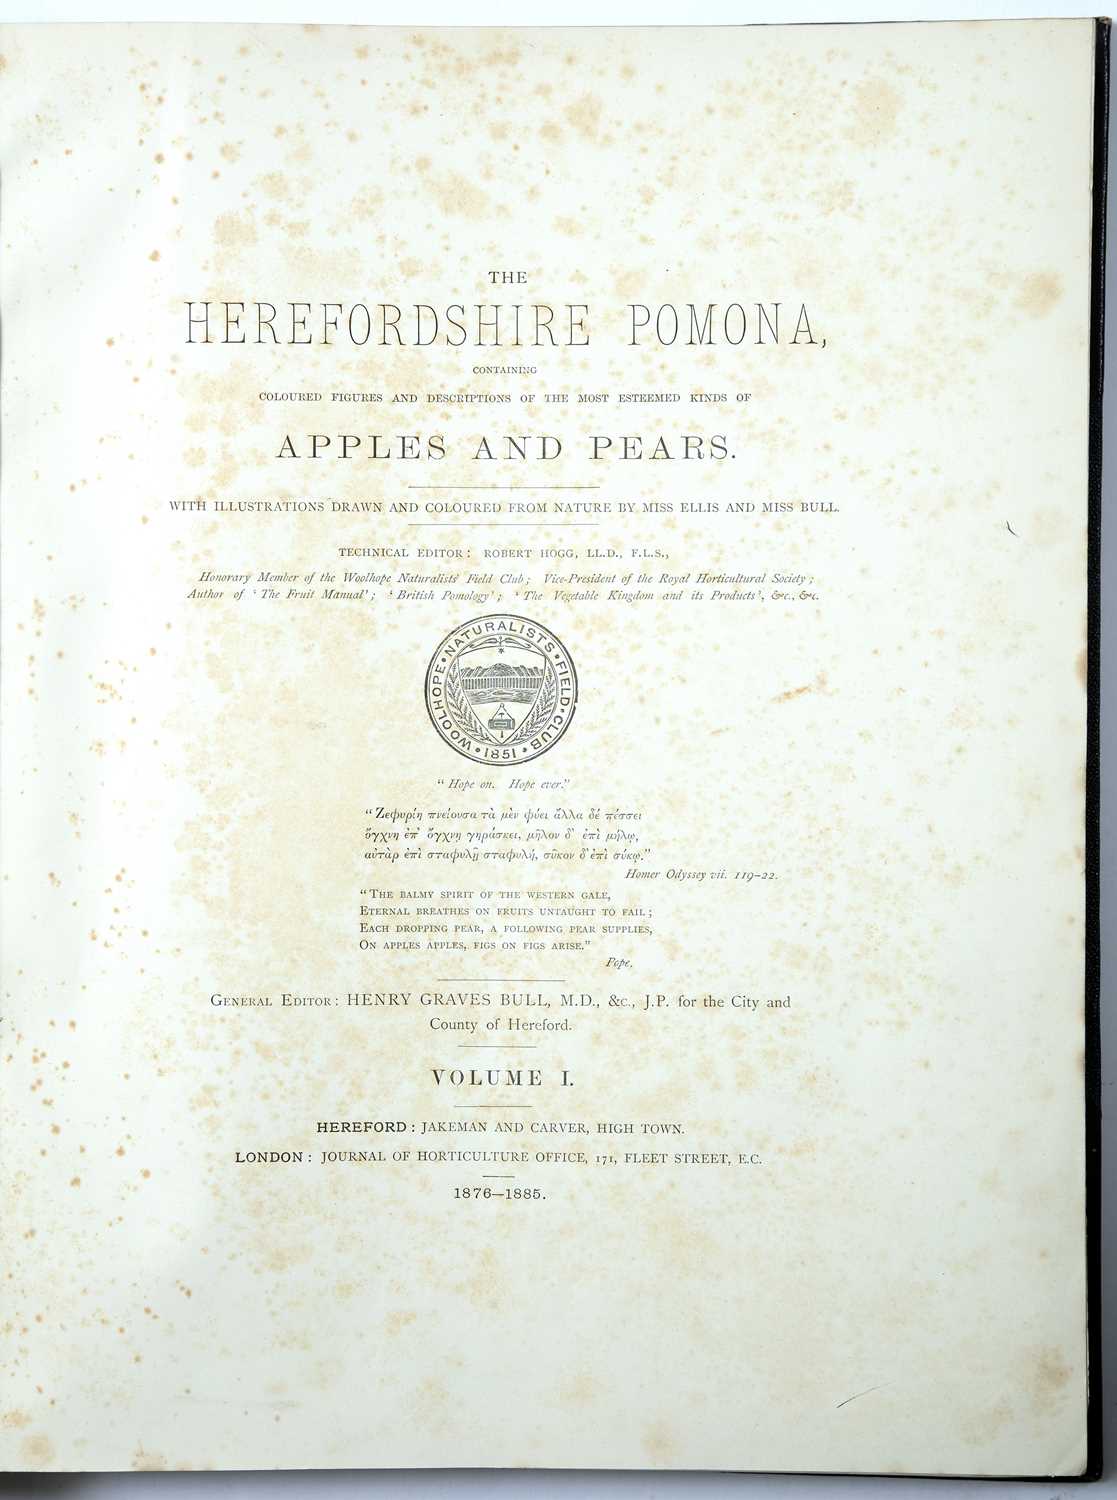 Bull, Henry Graves Ed. and Hogg, Robert. 'The Herefordshire Pomona containing coloured figures and - Image 4 of 11